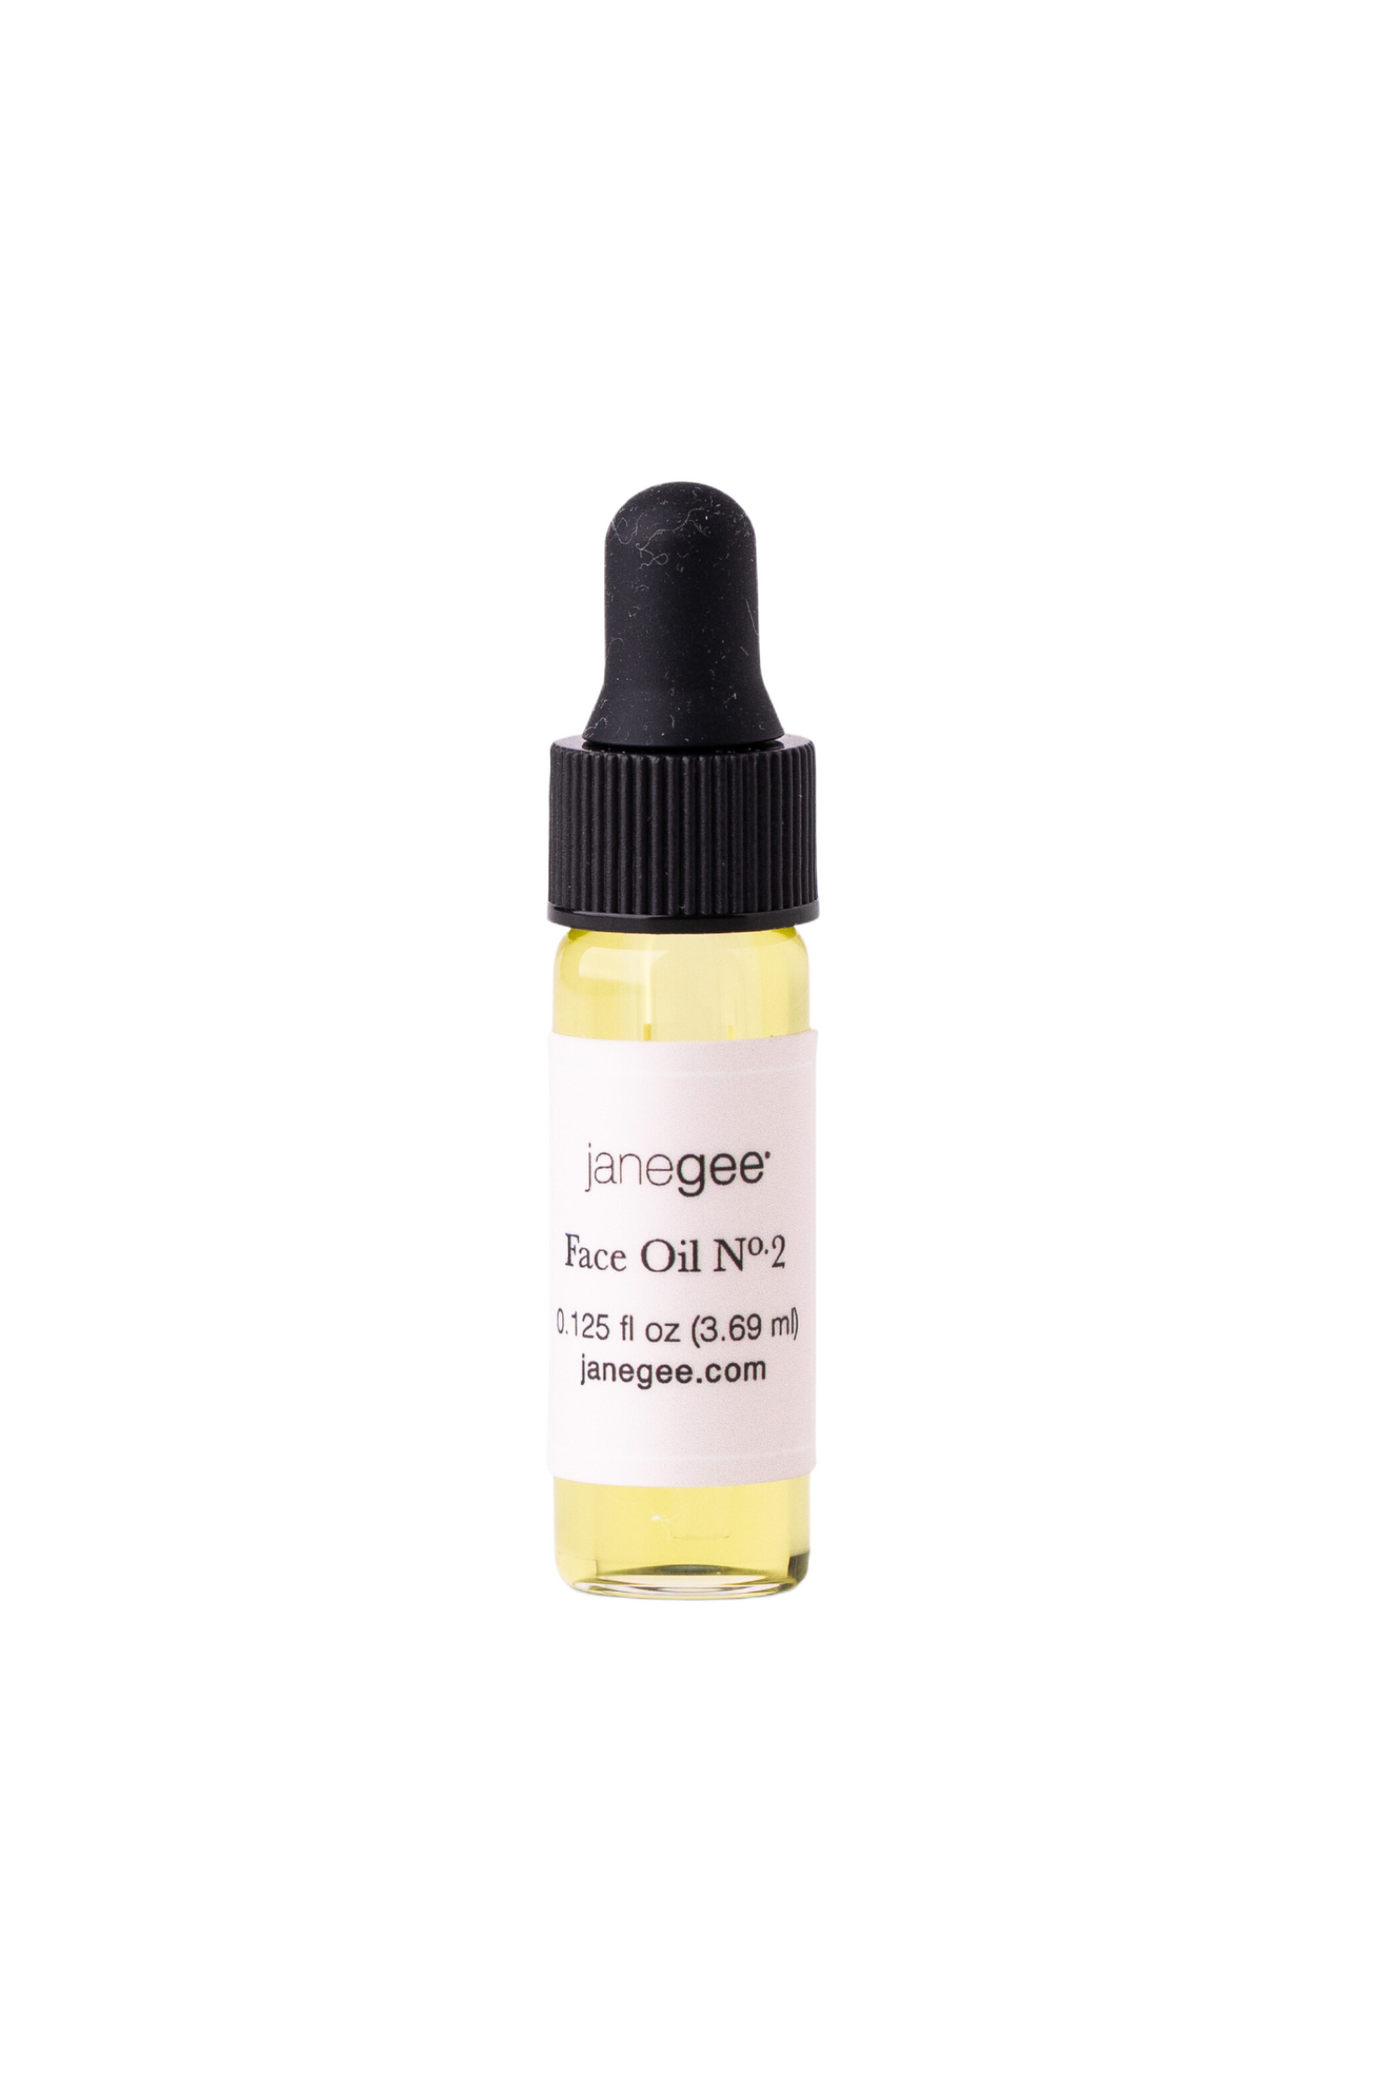 janegee Face Oil No.2 Sample